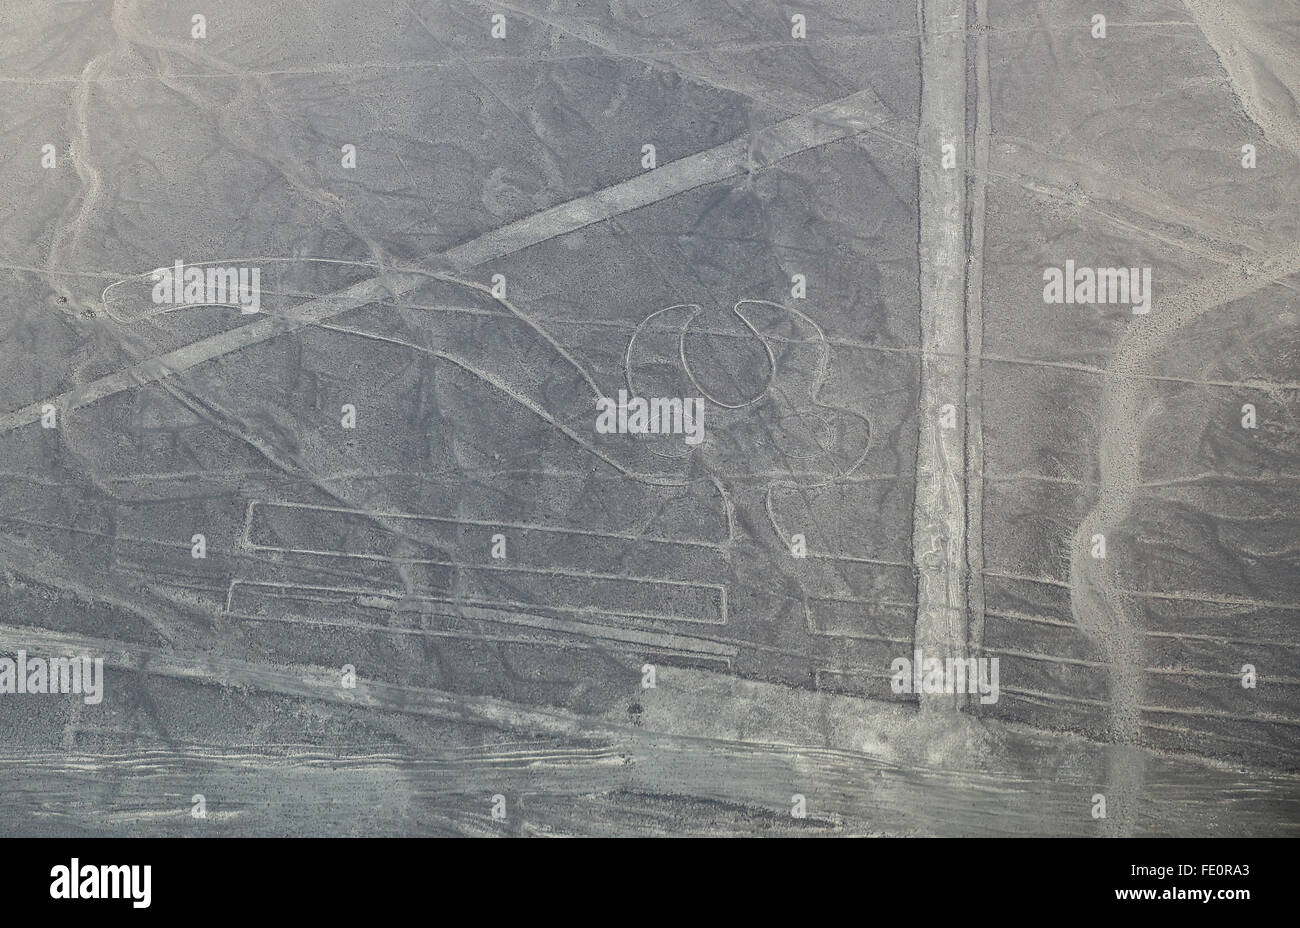 Aerial view of Nazca Lines - Parrot geoglyph, Peru. The Lines were designated as a UNESCO World Heritage Site in 1994. Stock Photo